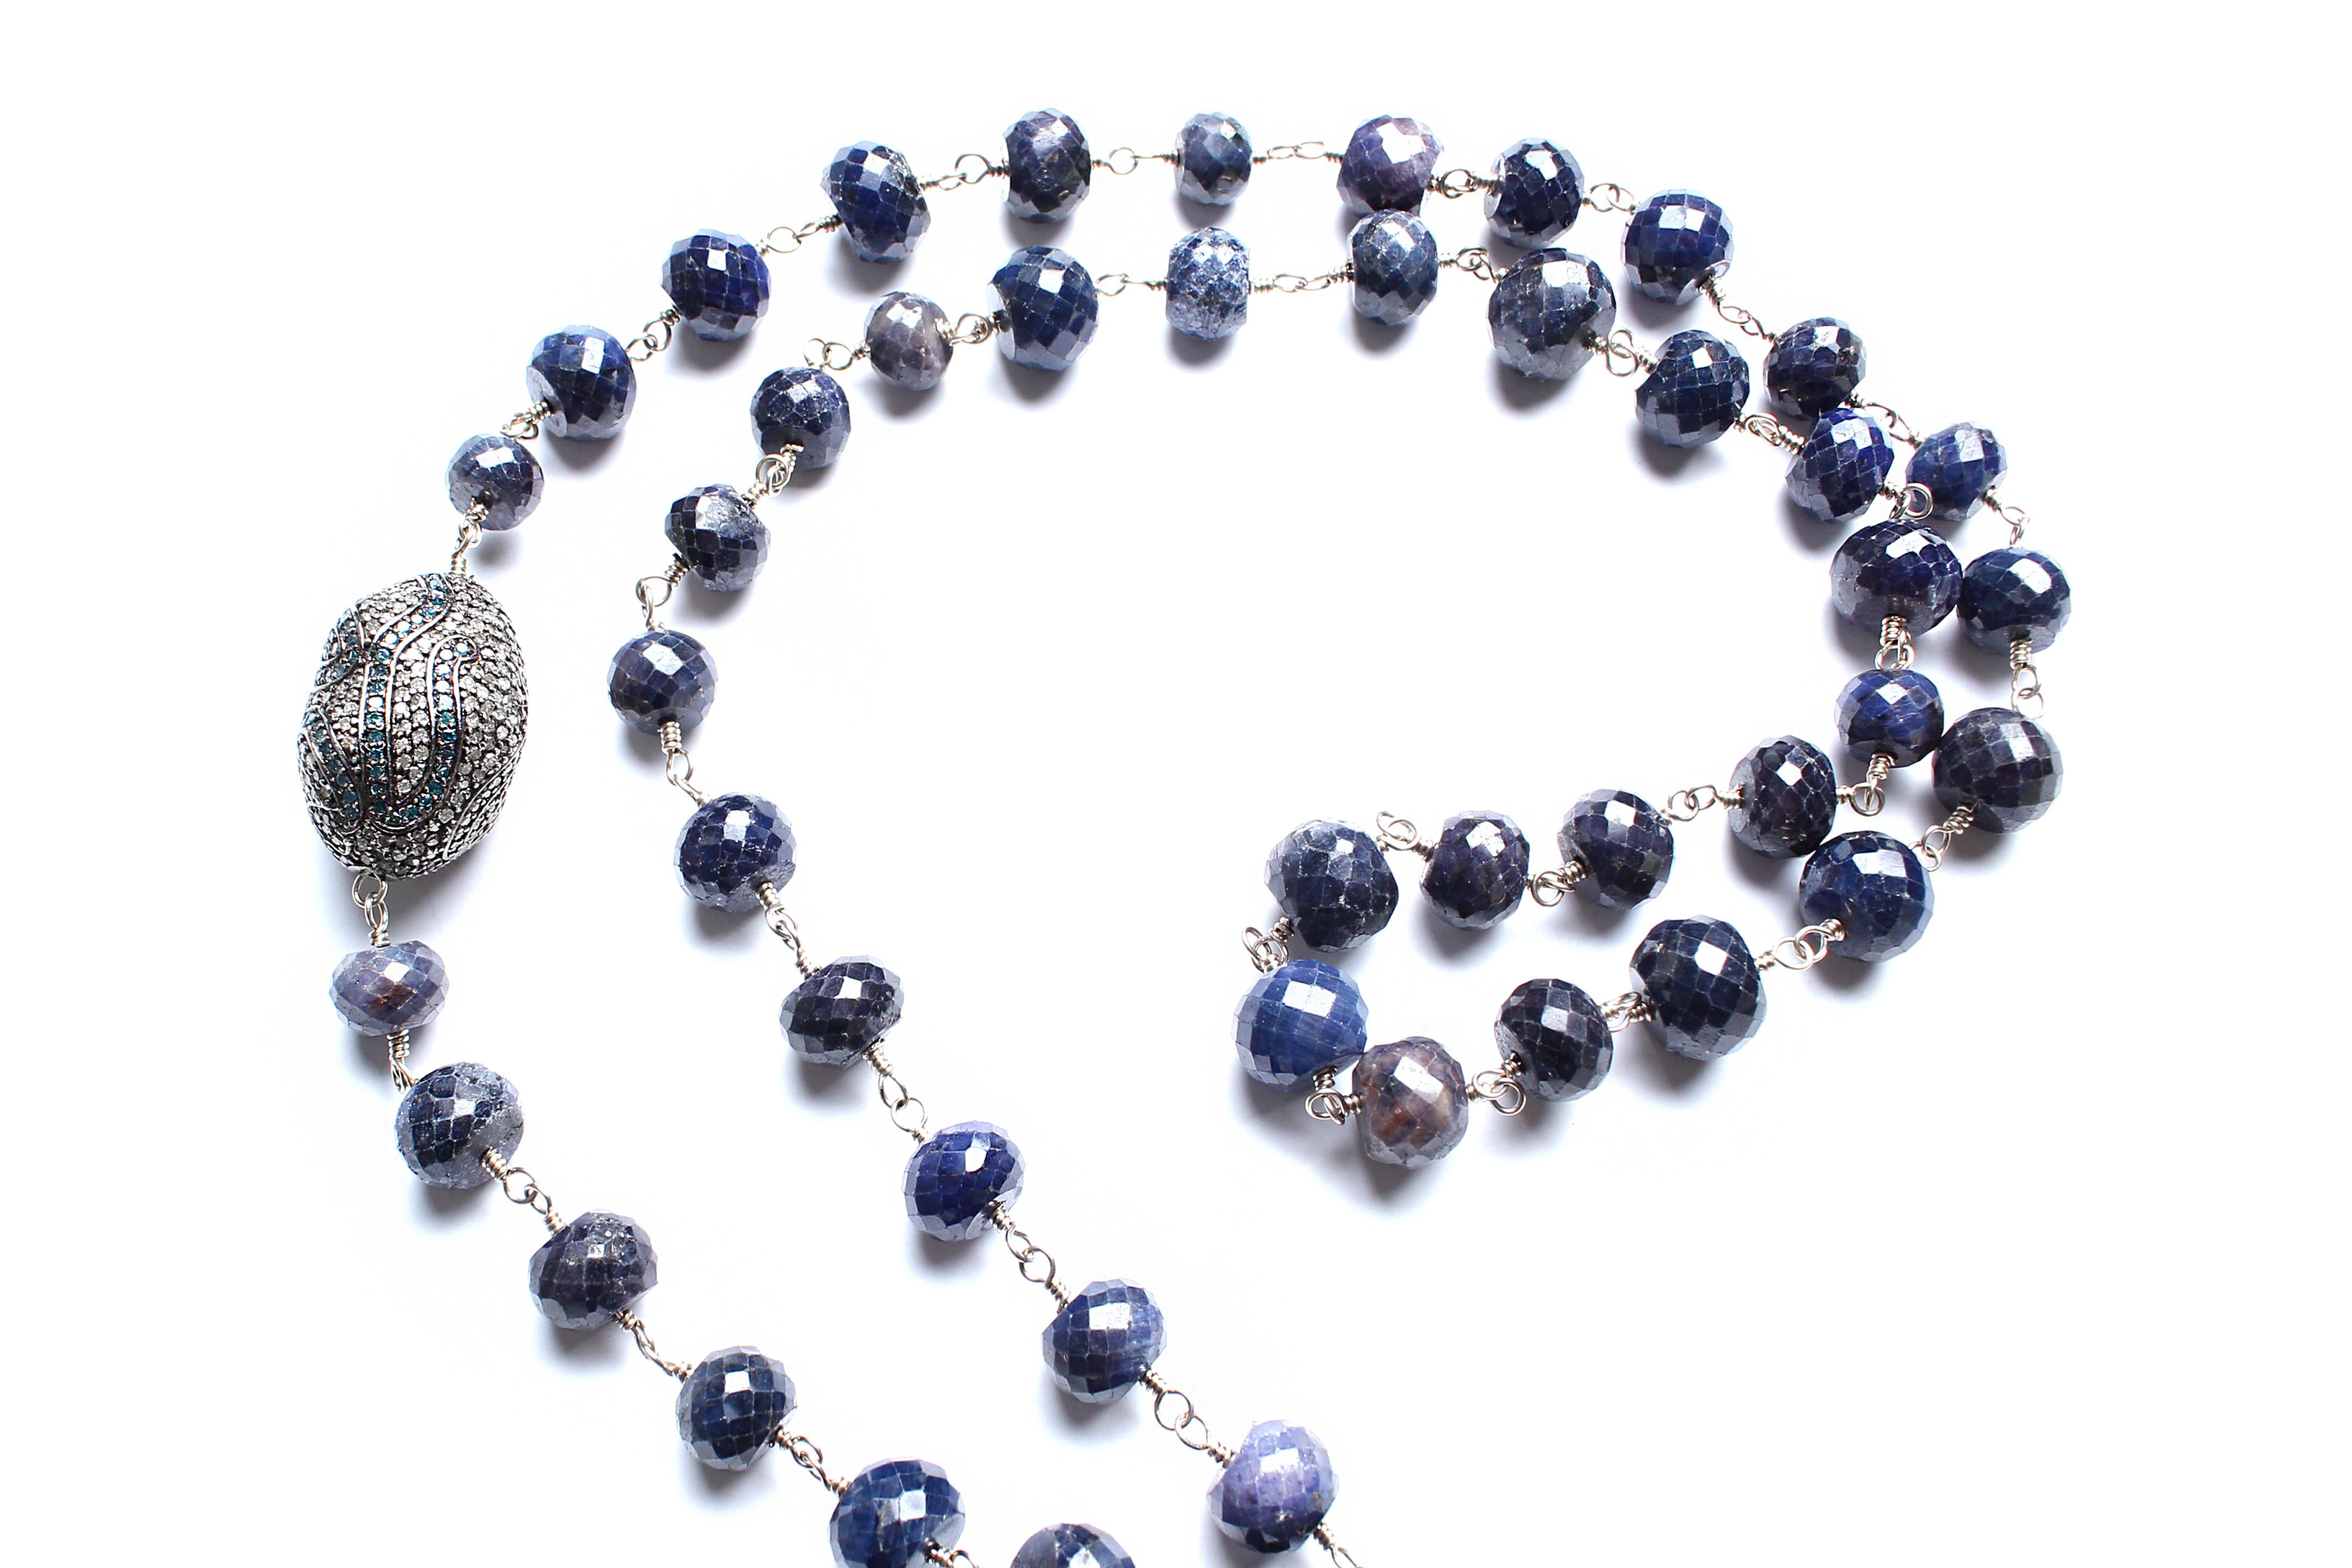 This beaded rosary consists of tourmaline faceted beads, sterling silver 925 wiring, double sided 925 sterling silver diamond clasp. Clasp opens and closes allowing to remove and change pendant. Sapphire, silver, and diamond tumbler bead. Full total